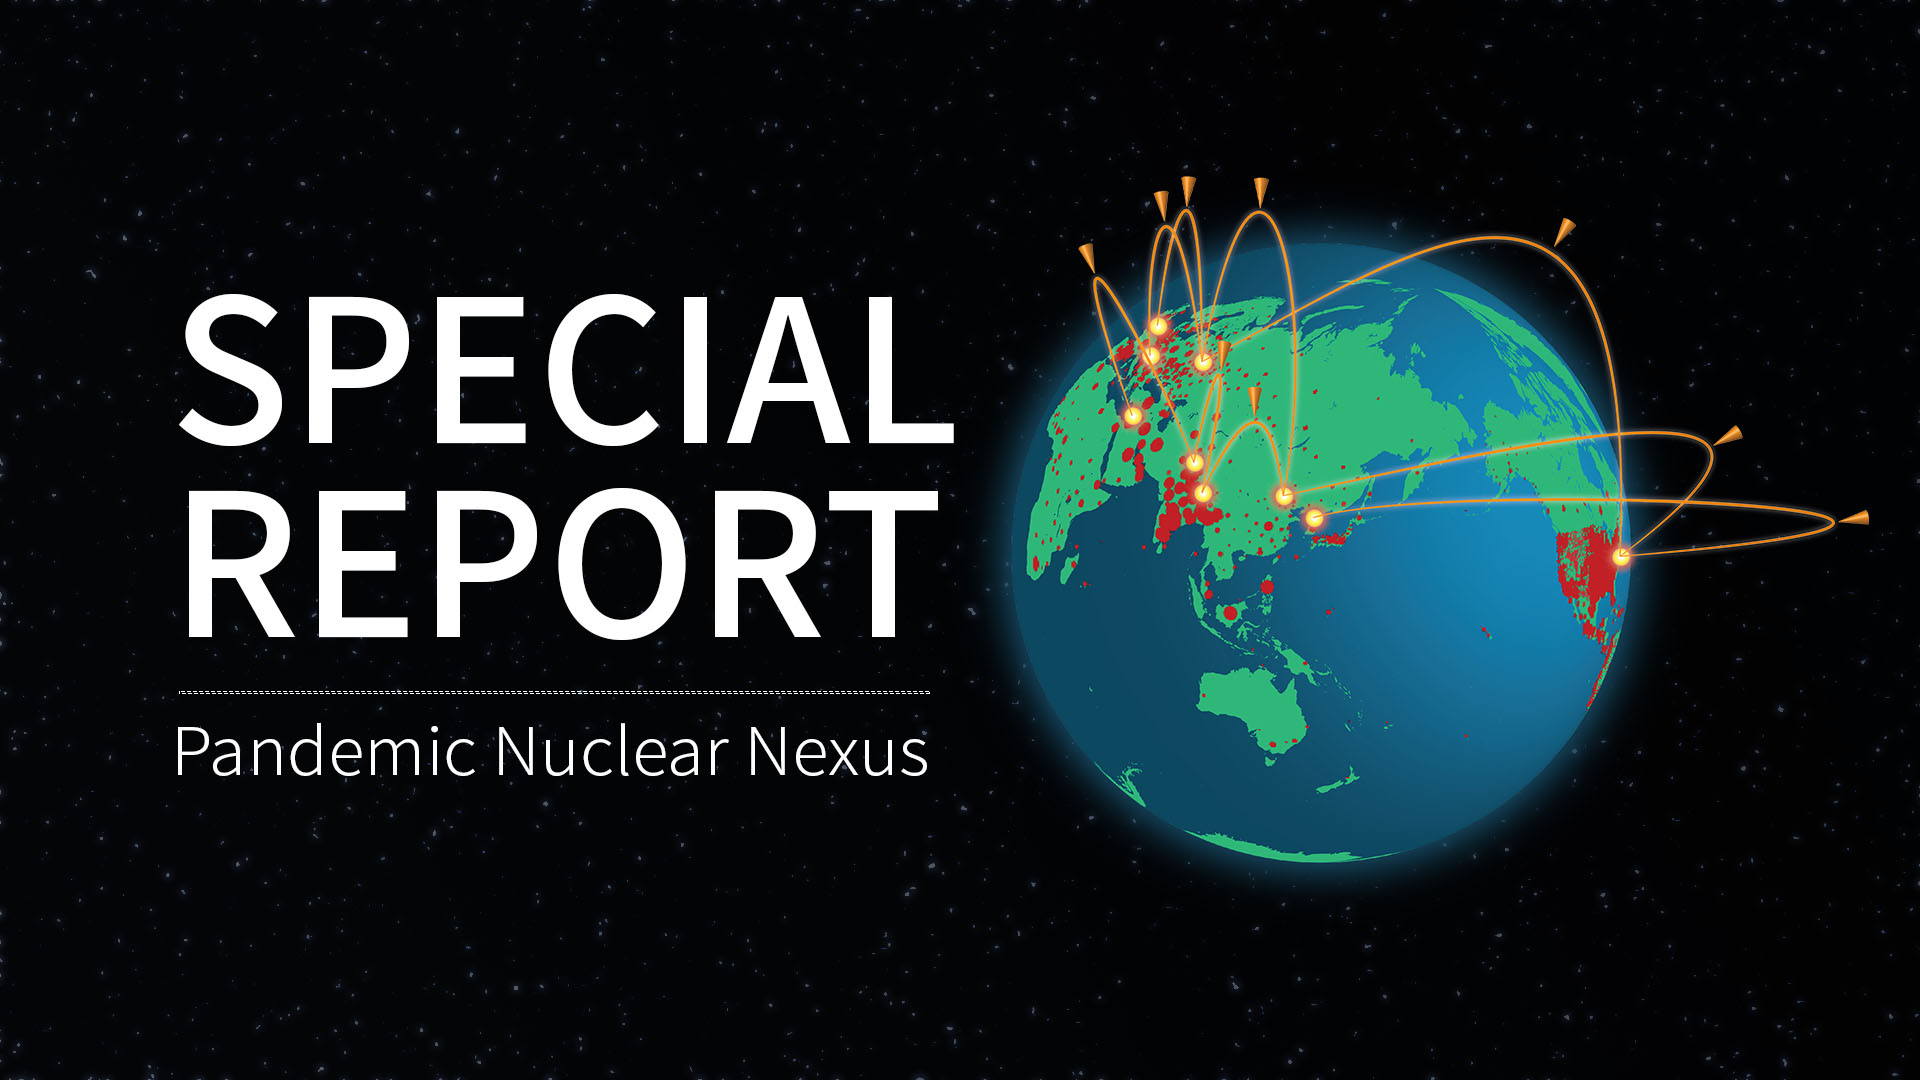 SPECIAL REPORT: The US Election and Nuclear Order in the Post-Pandemic World